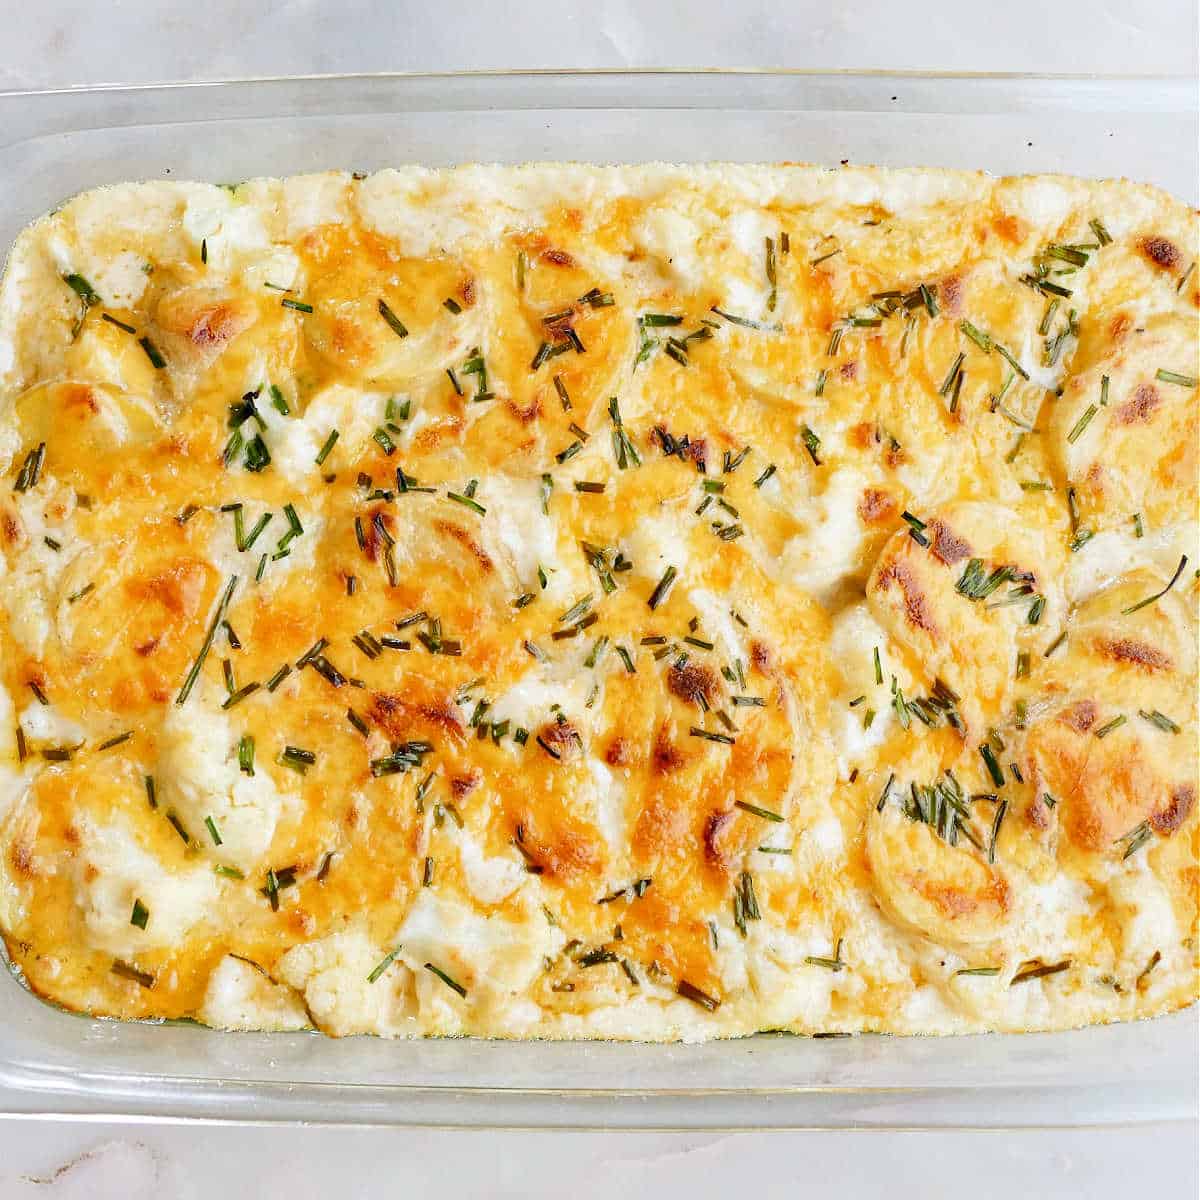 cauliflower and potato bake with cheese and chives in a dish after baking